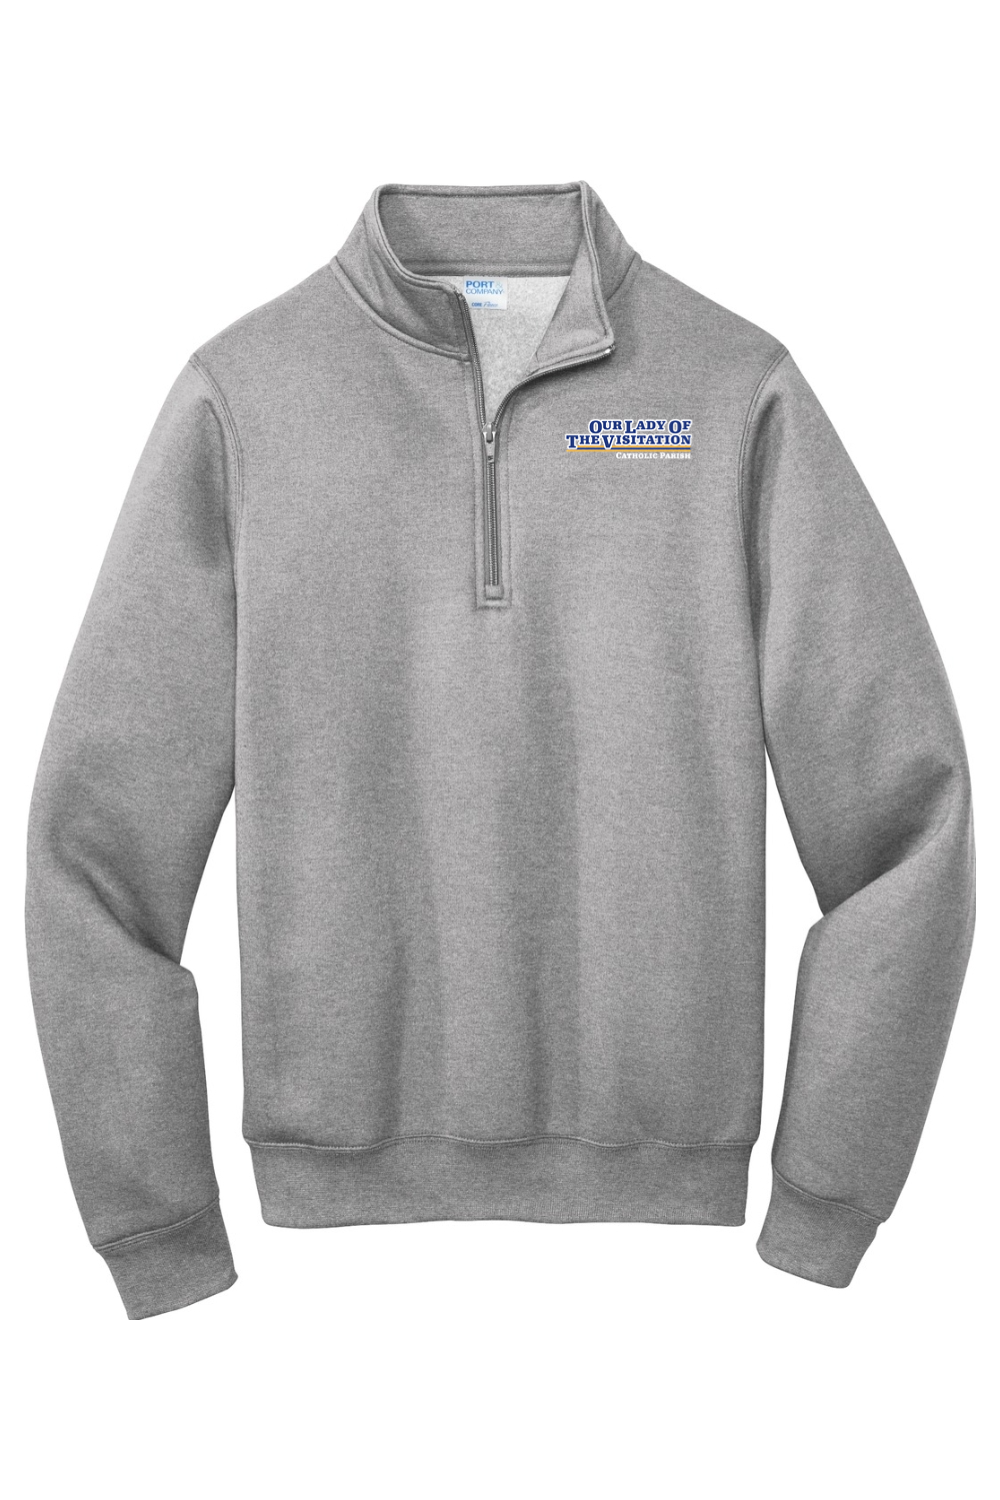 Our Lady of the Visitation Bold Left Chest Quarter Zip